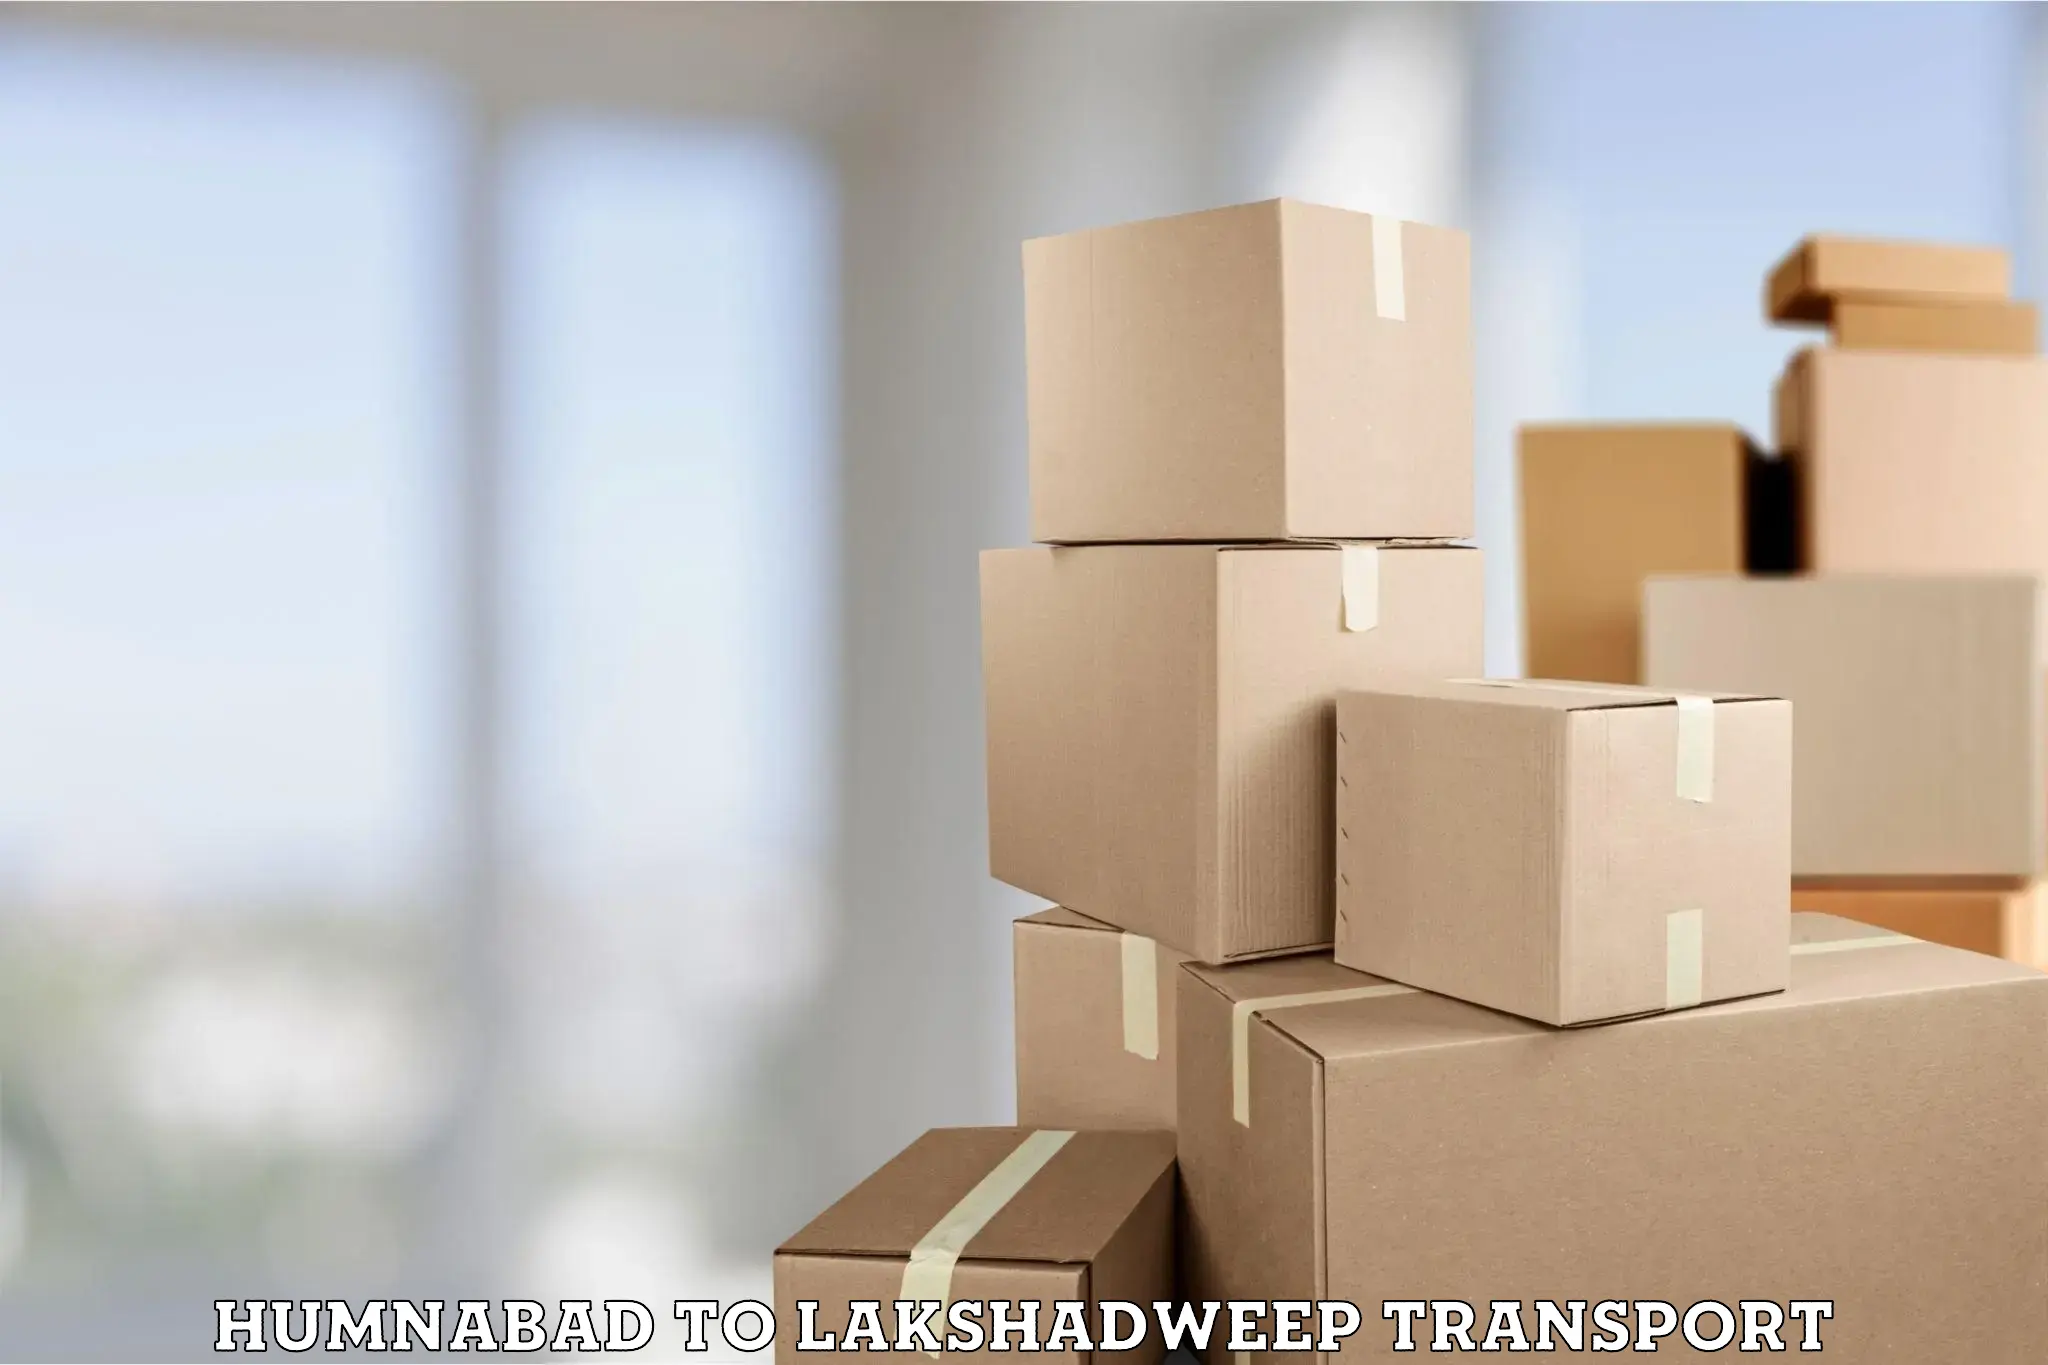 Delivery service Humnabad to Lakshadweep